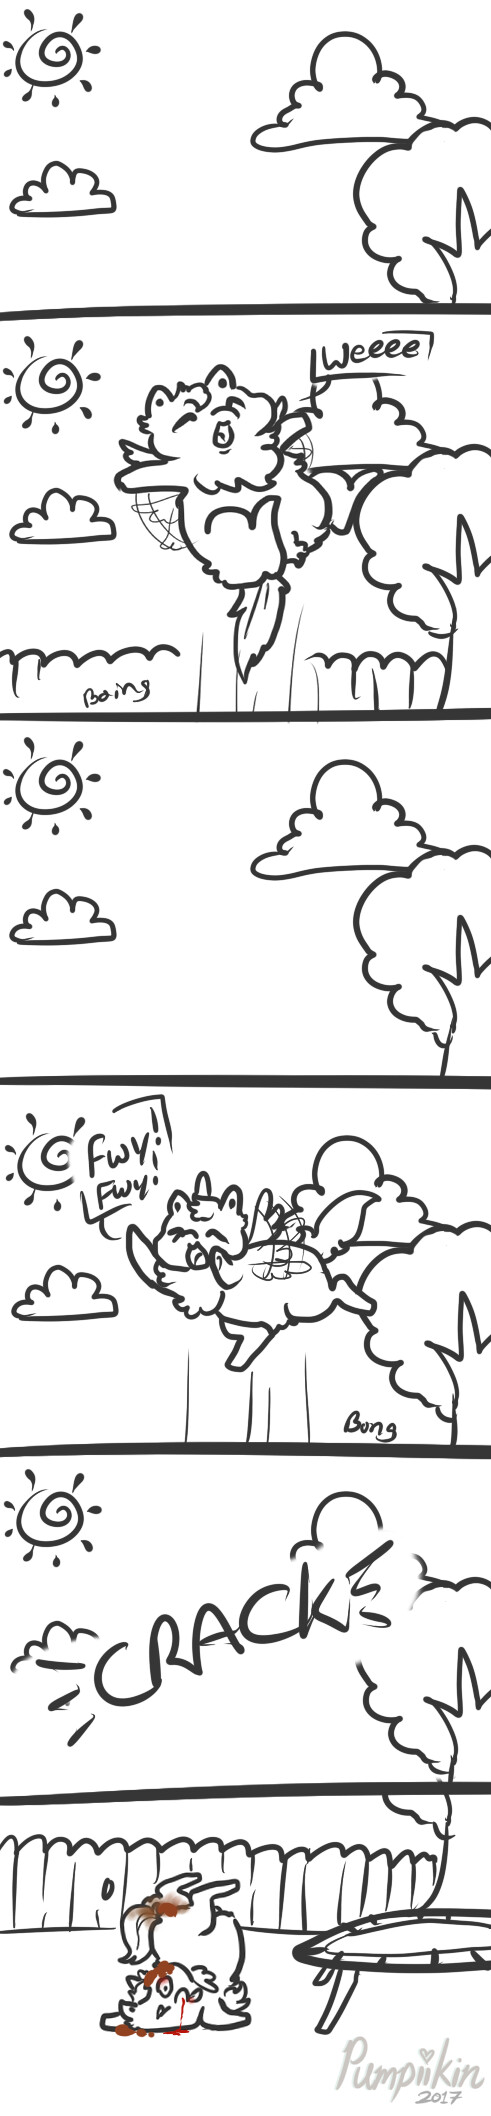 46375 - artist_pumpiikin broken_neck comic cute dead_fluffy doodle jumping questionable request_anonymous trampoline trying_to_fly